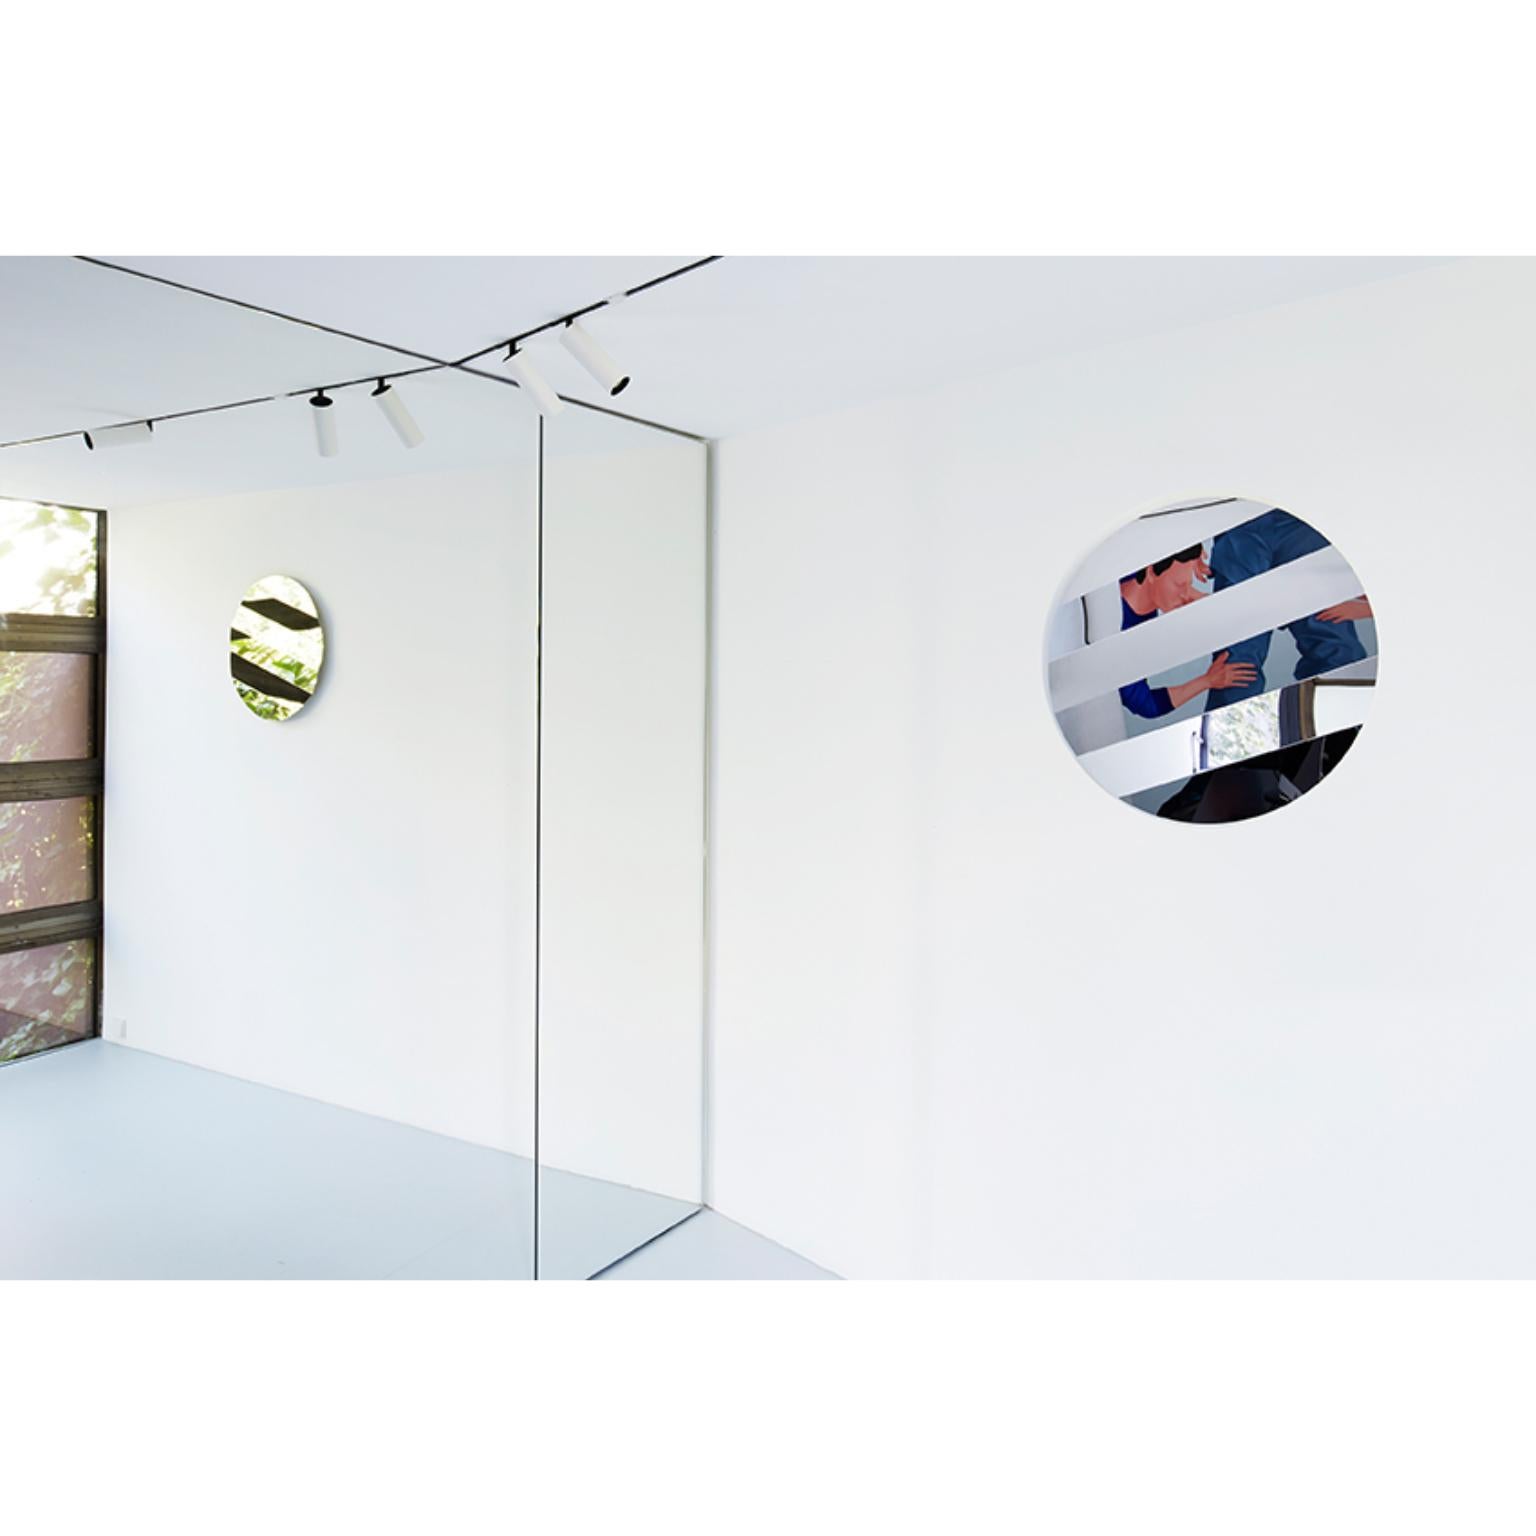 Stripe Mirror 90 Circle by Sebastian Scherer
Dimensions: ø : 90 
Materials: Mirror Stainless Steel, Wooden Bracket
Different sizes are available. Square version available.

The STRIPE wall mirror creates a fascinating graphic effect: the minimally